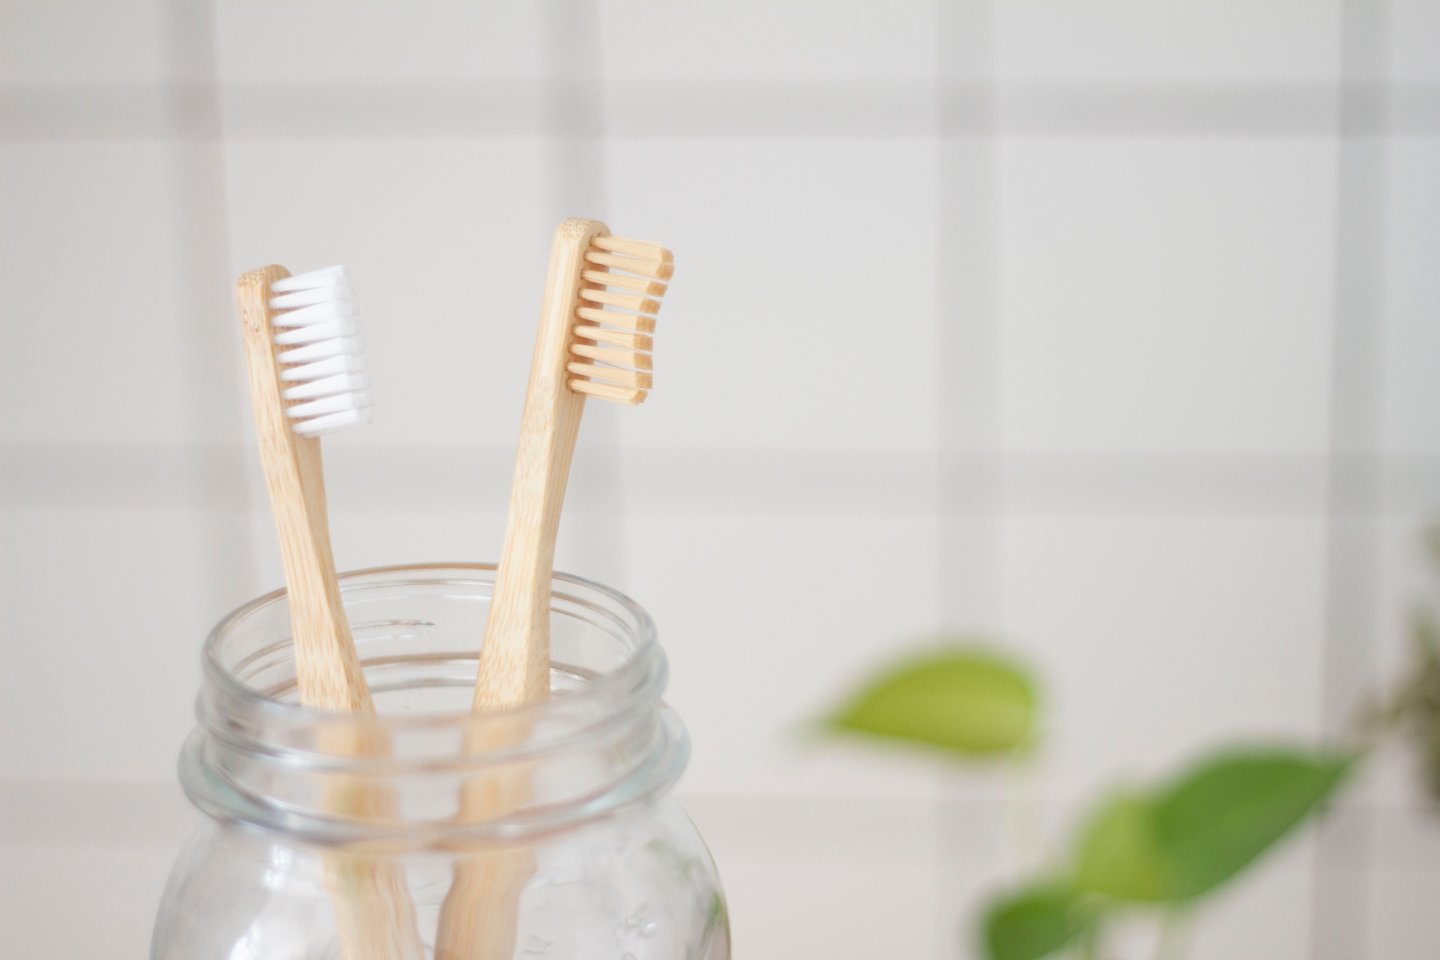 Two toothbrushes with wooden handles in a glass jar